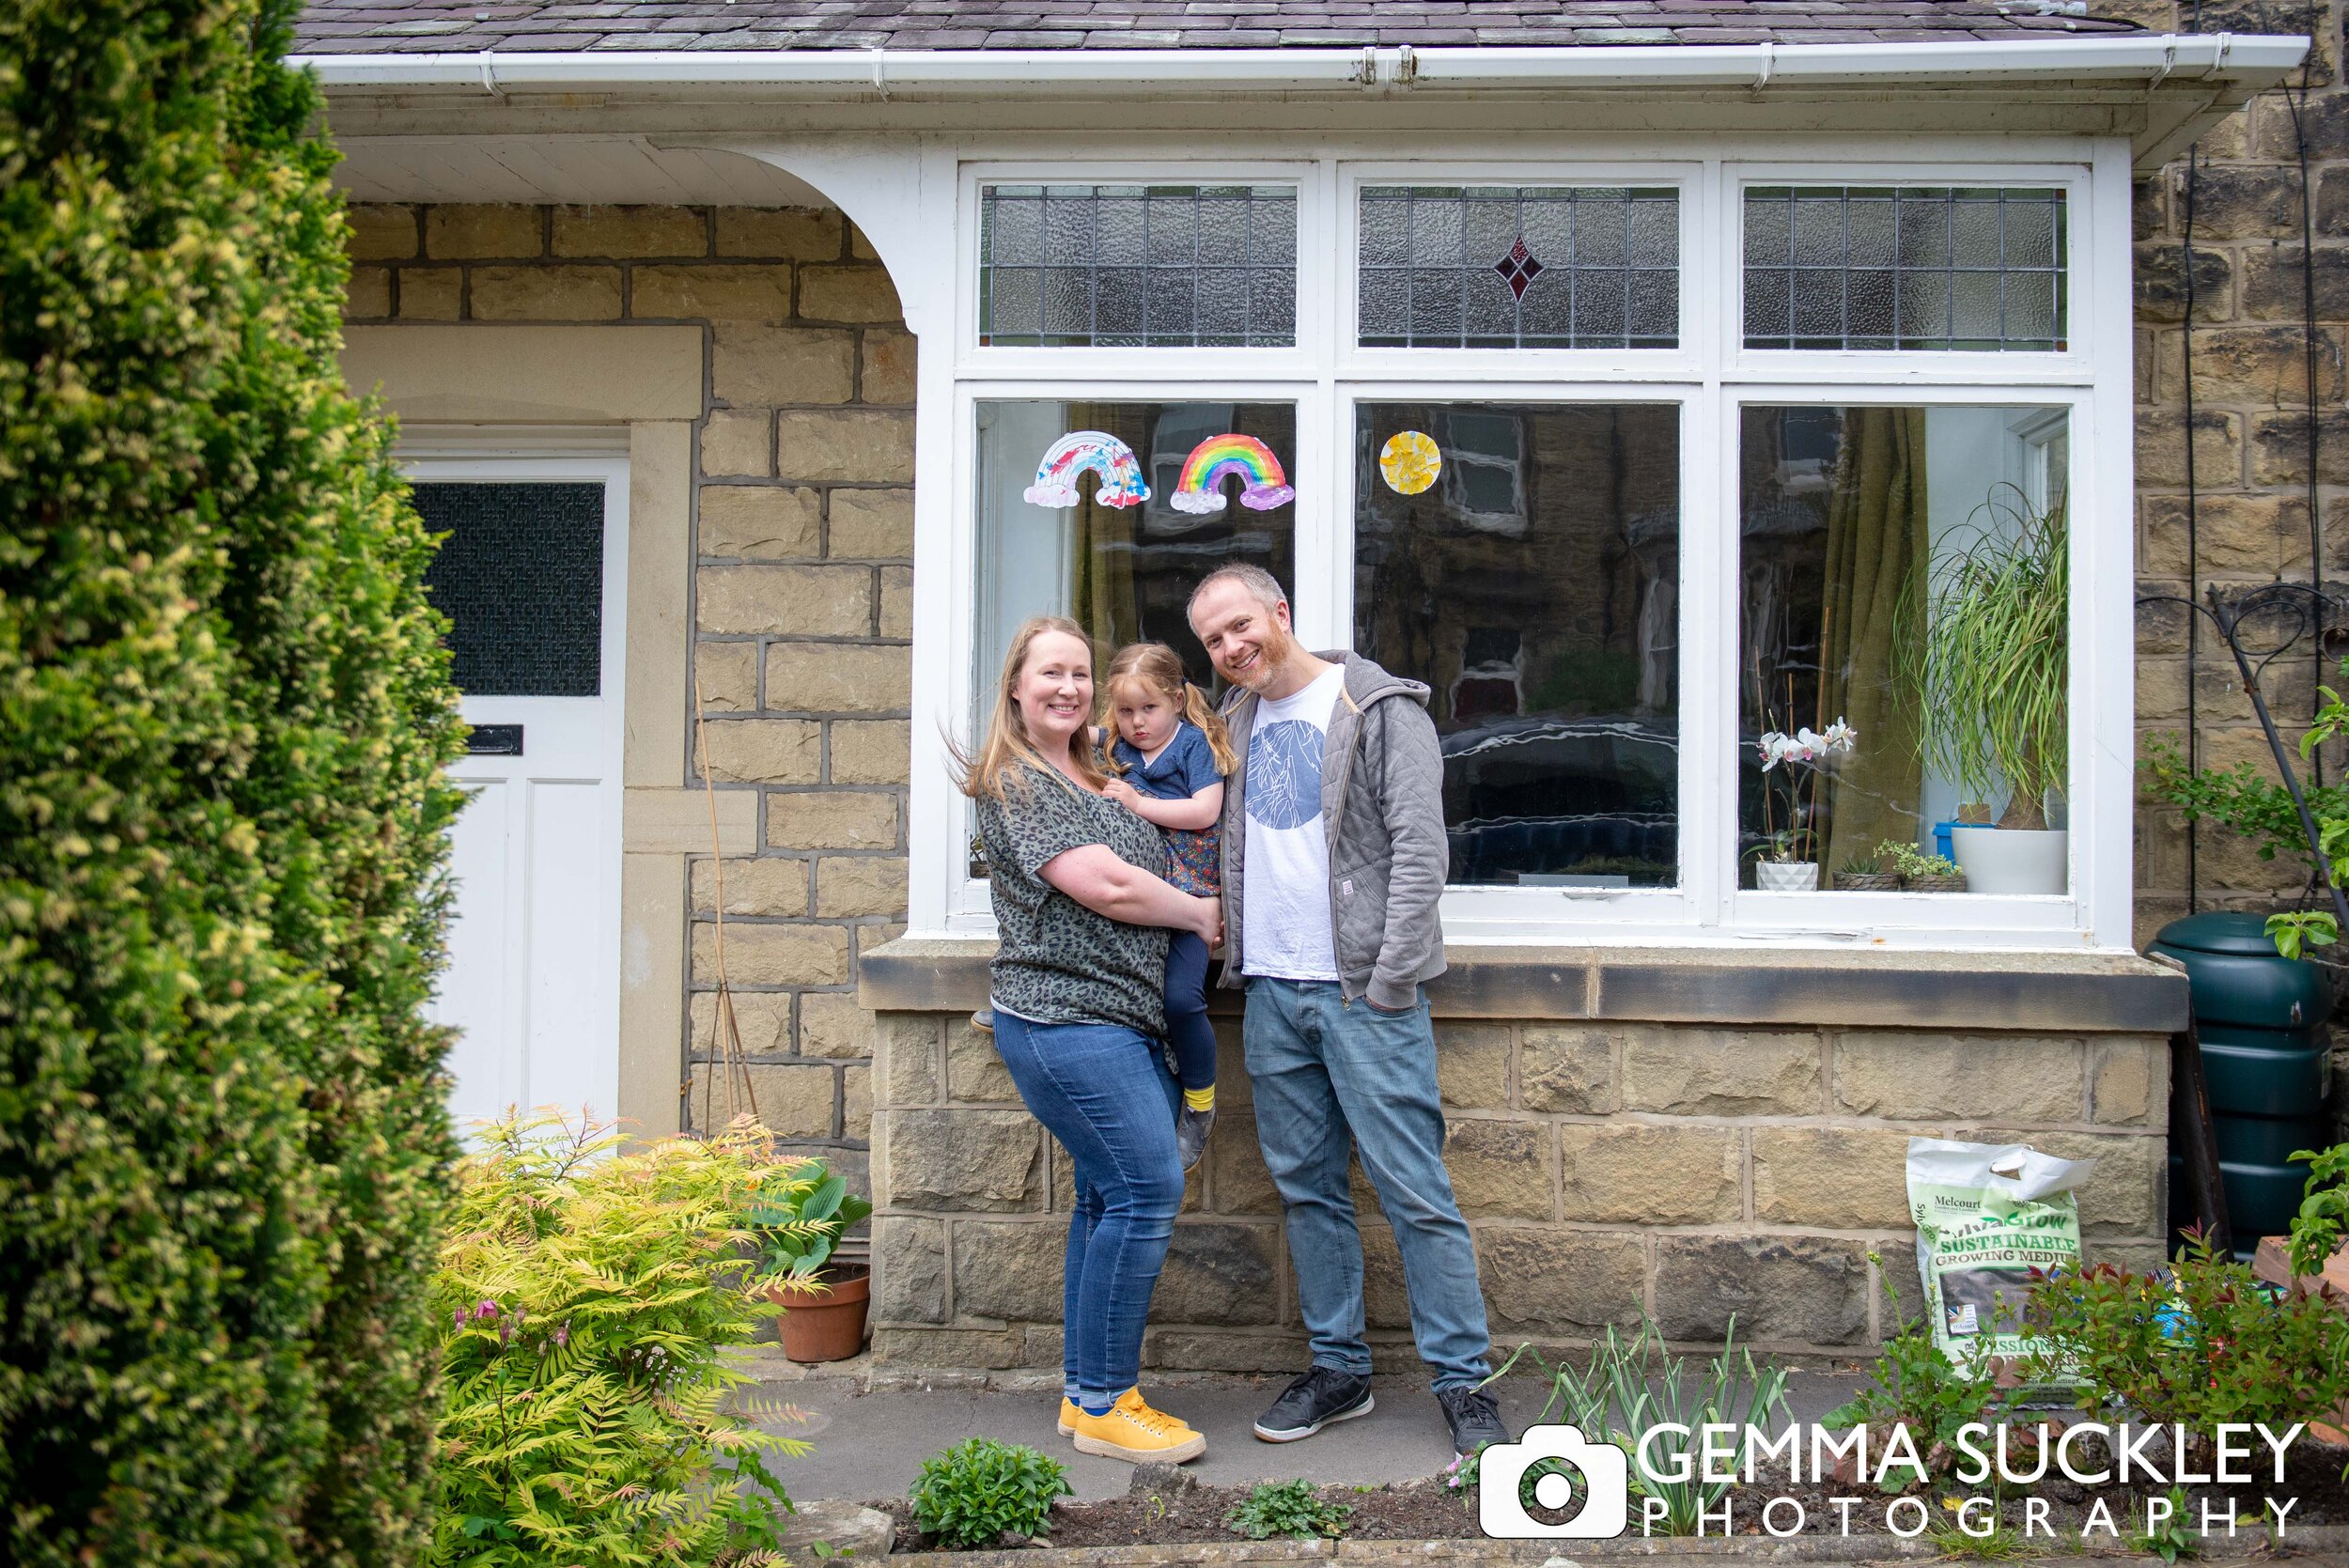 skipton couple and their kids smiling outside their house for a photo